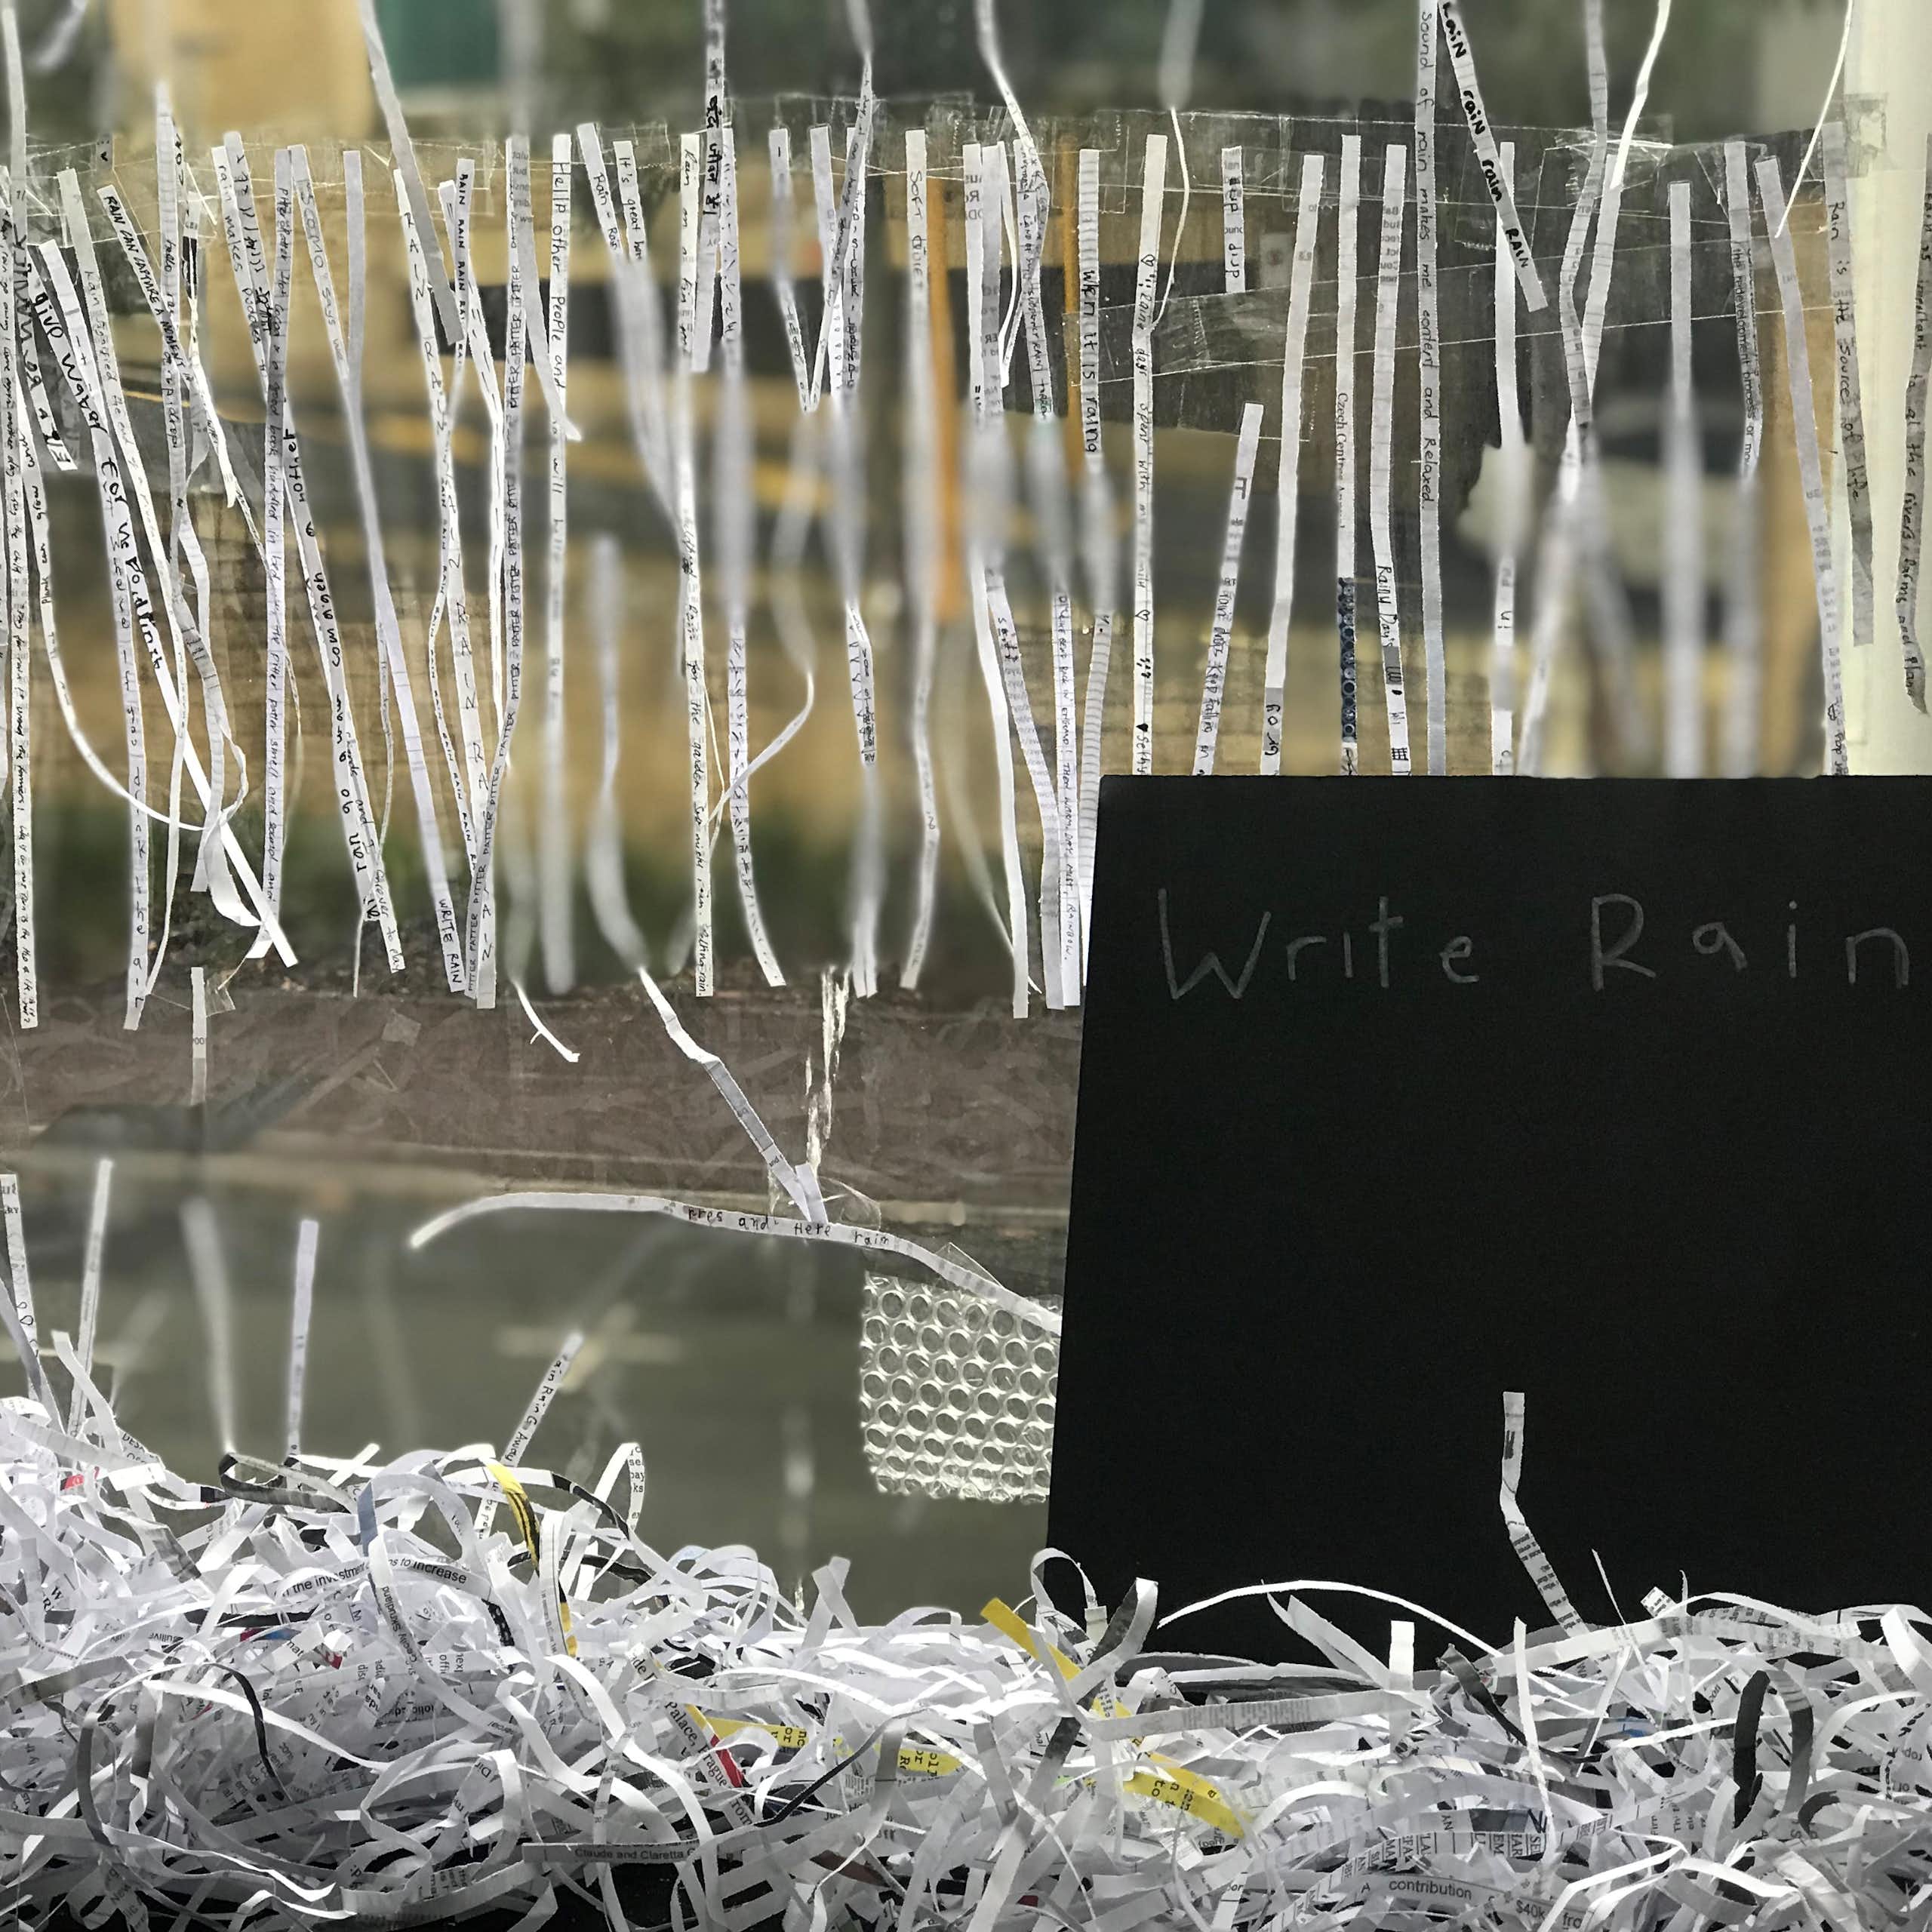 A chalkboard saying 'write rain' is seen alongside many very thin strips of paper with writing on them.